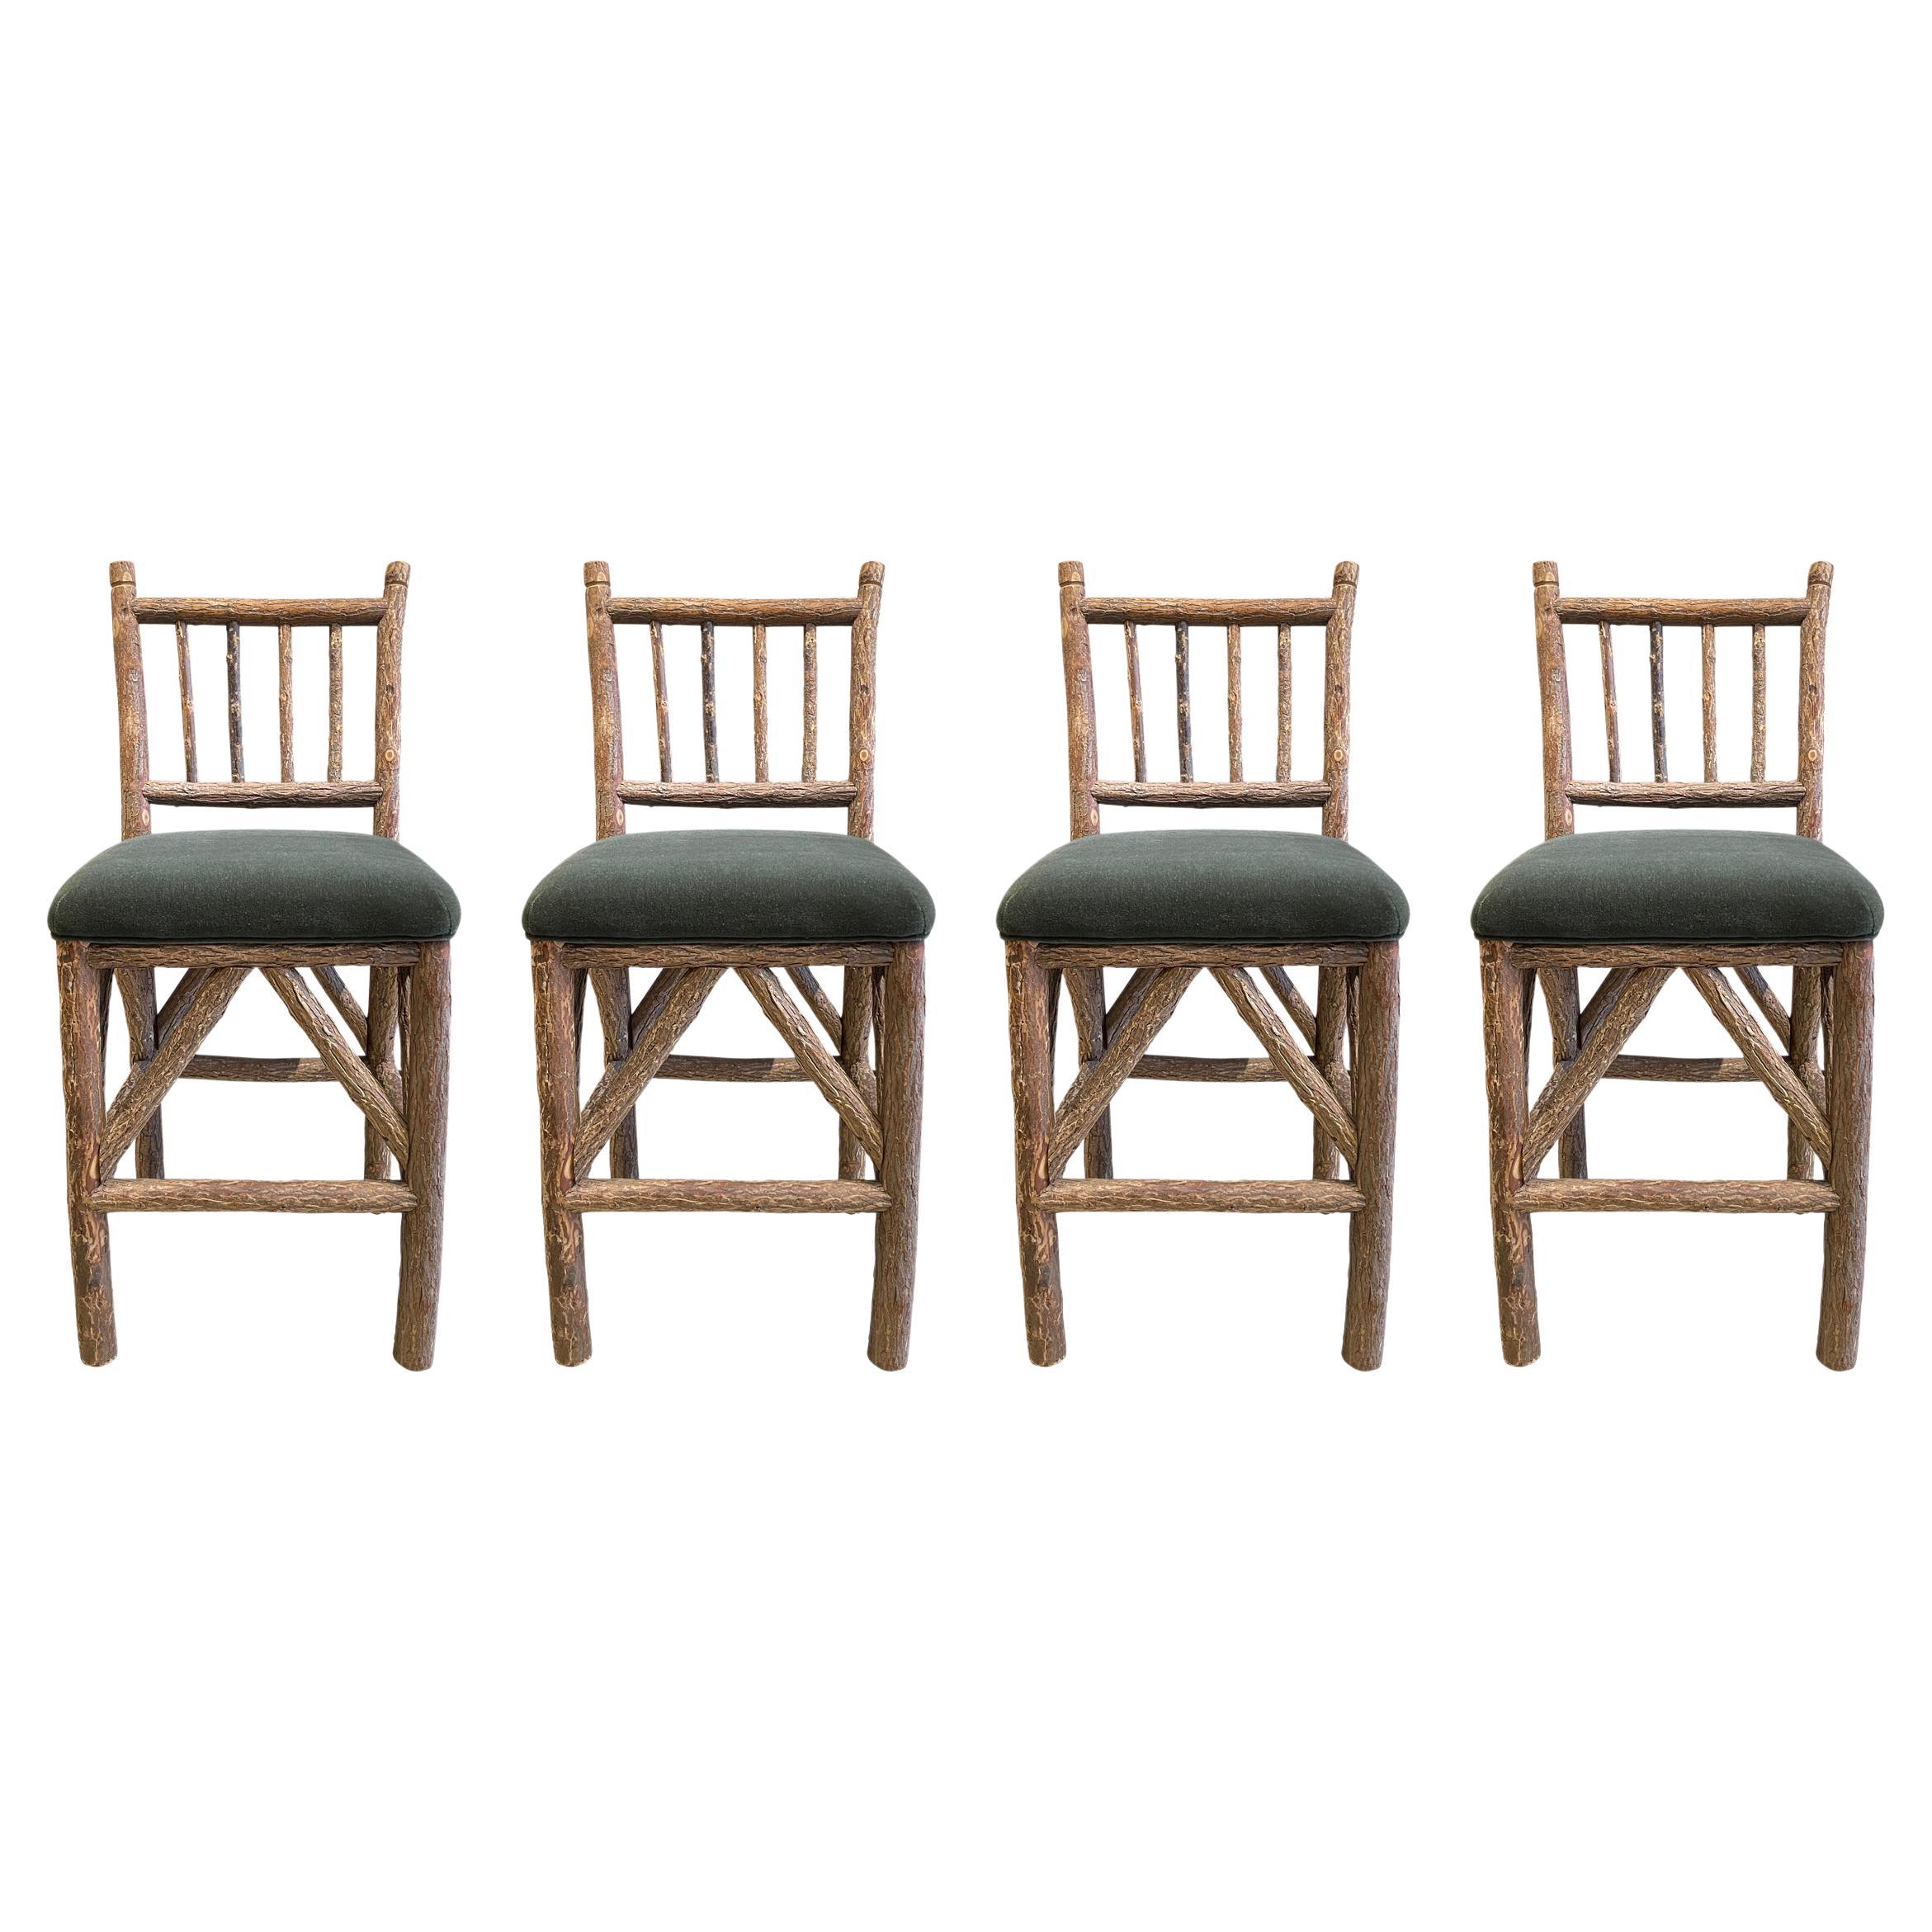 Set of Four Old Hickory Bar Stools